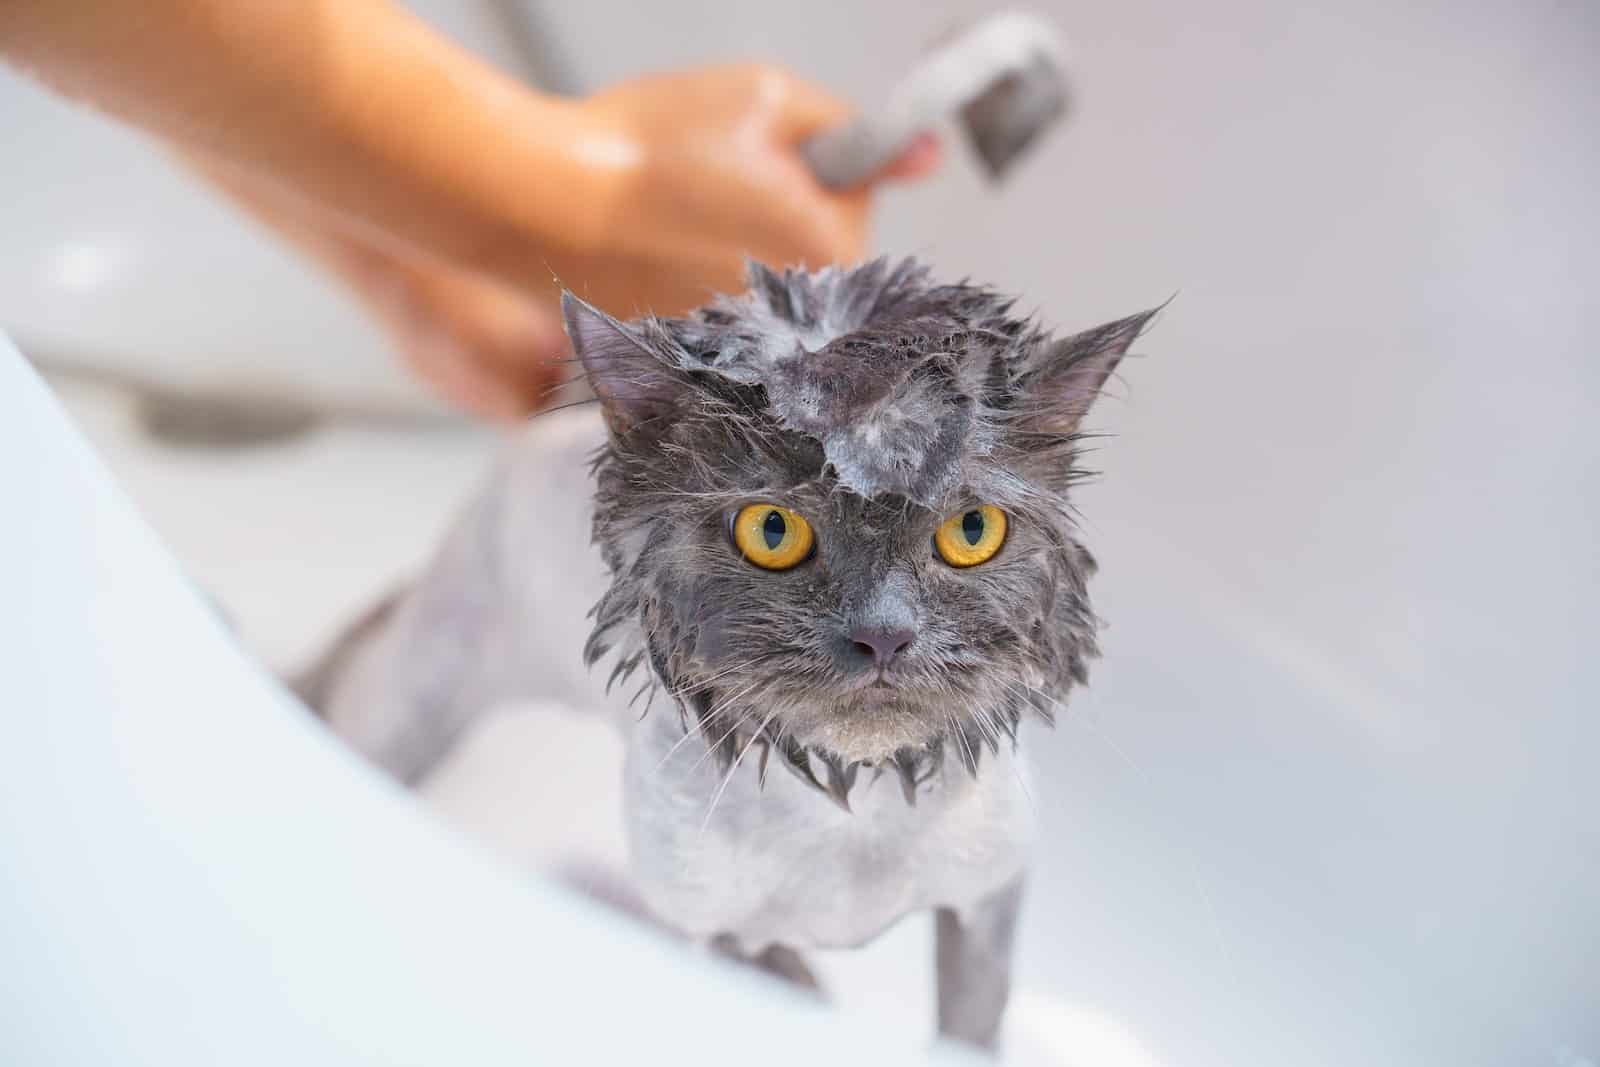 Photograph of a Cat Bathing